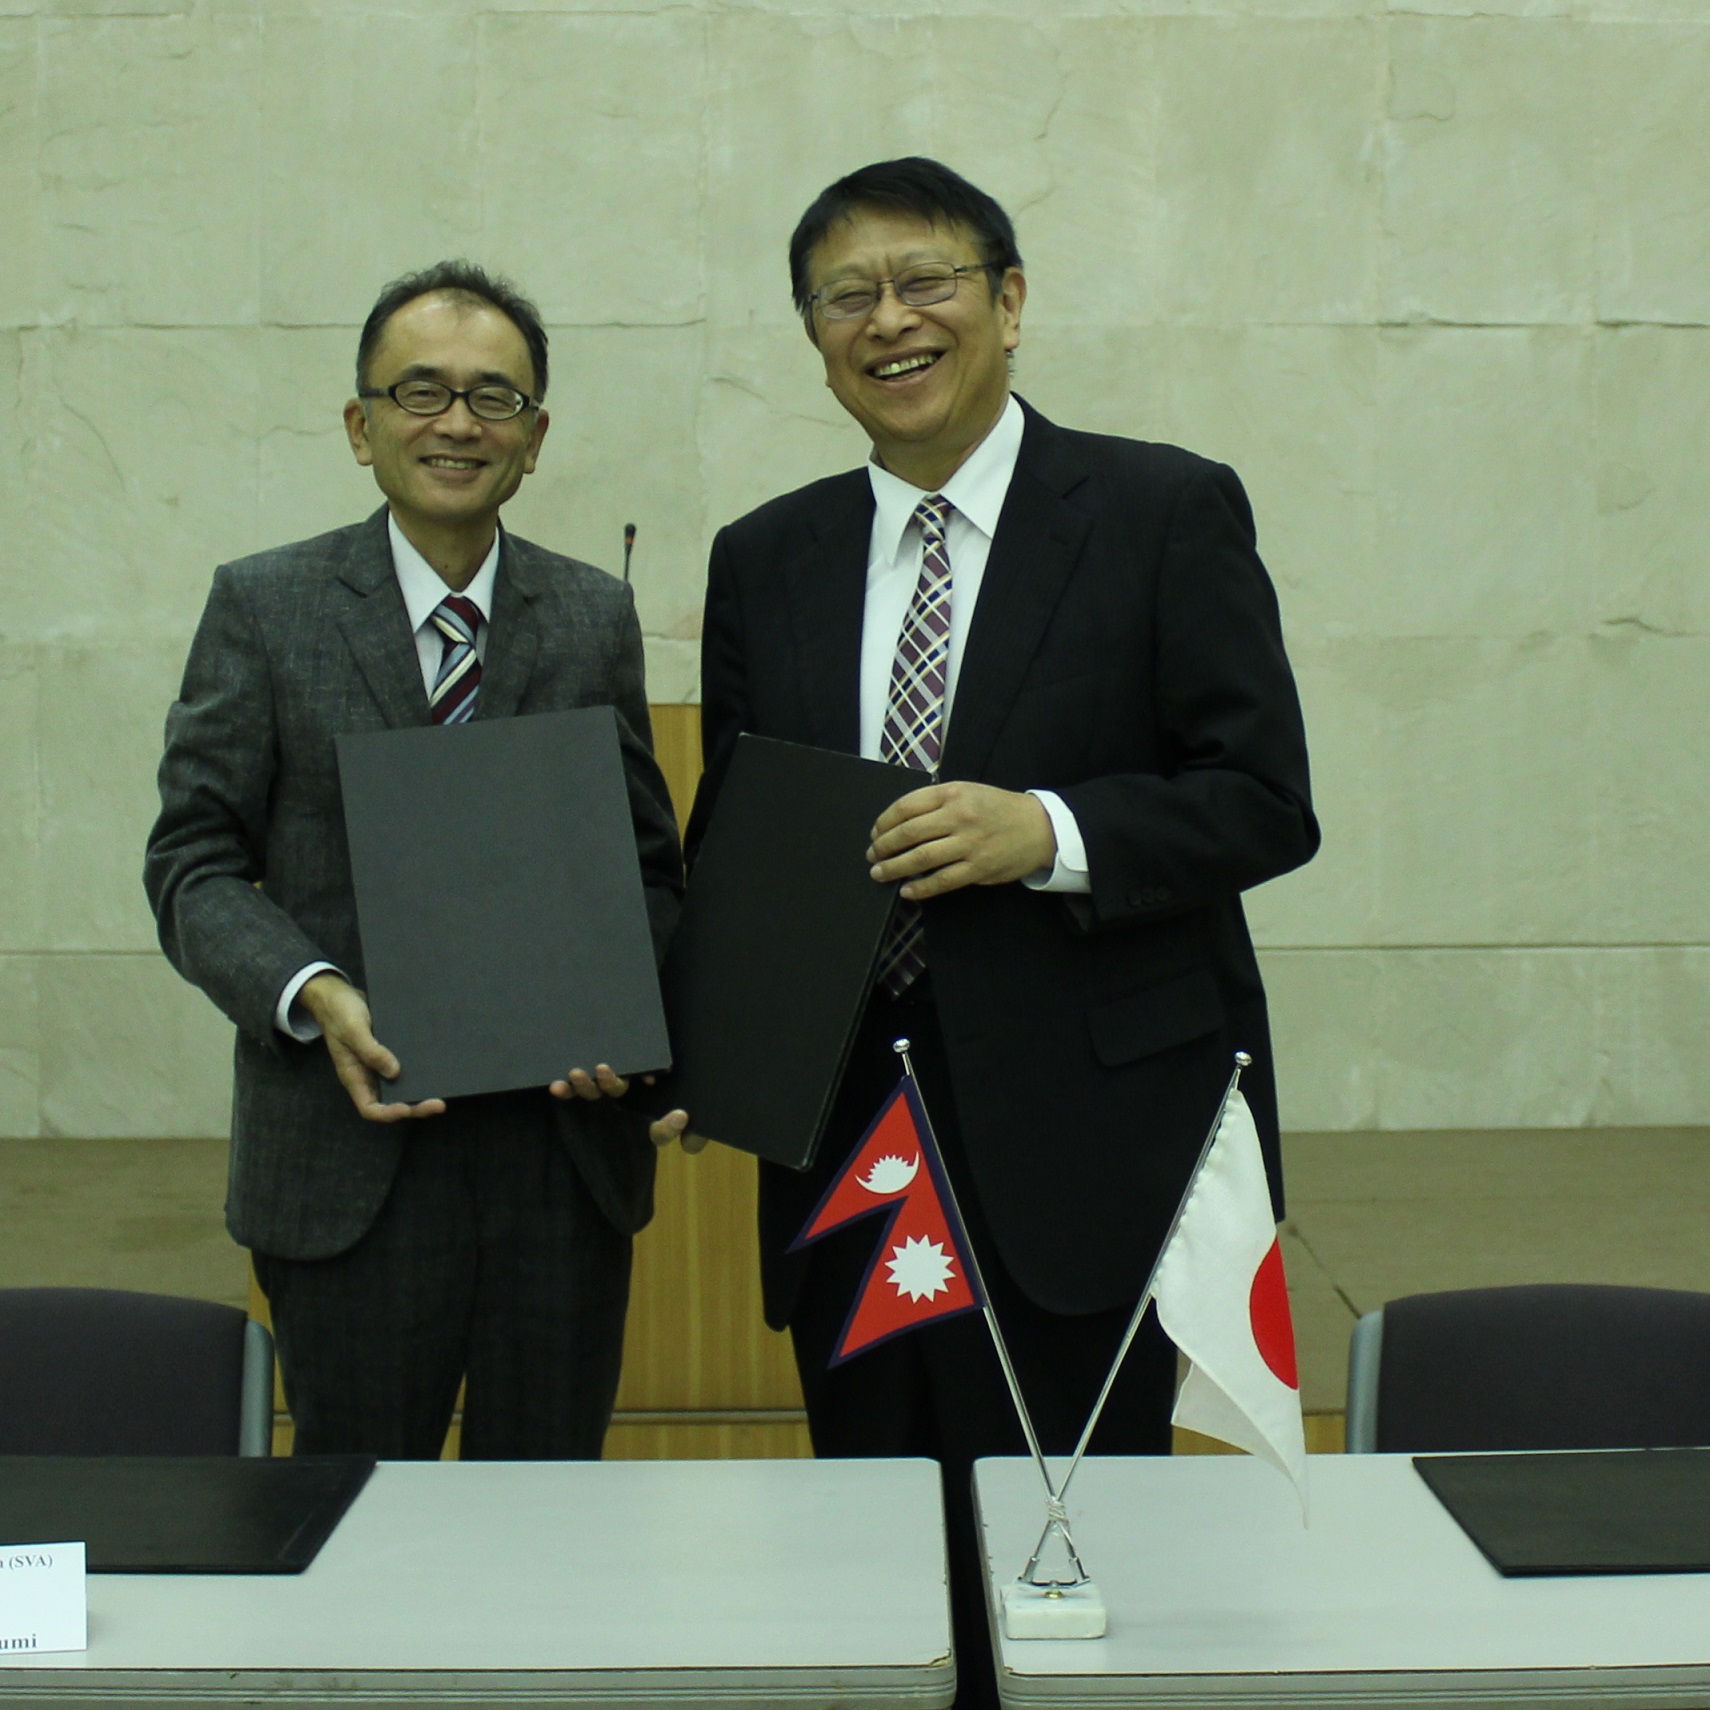 Japan assists for quality education in quake-affected areas